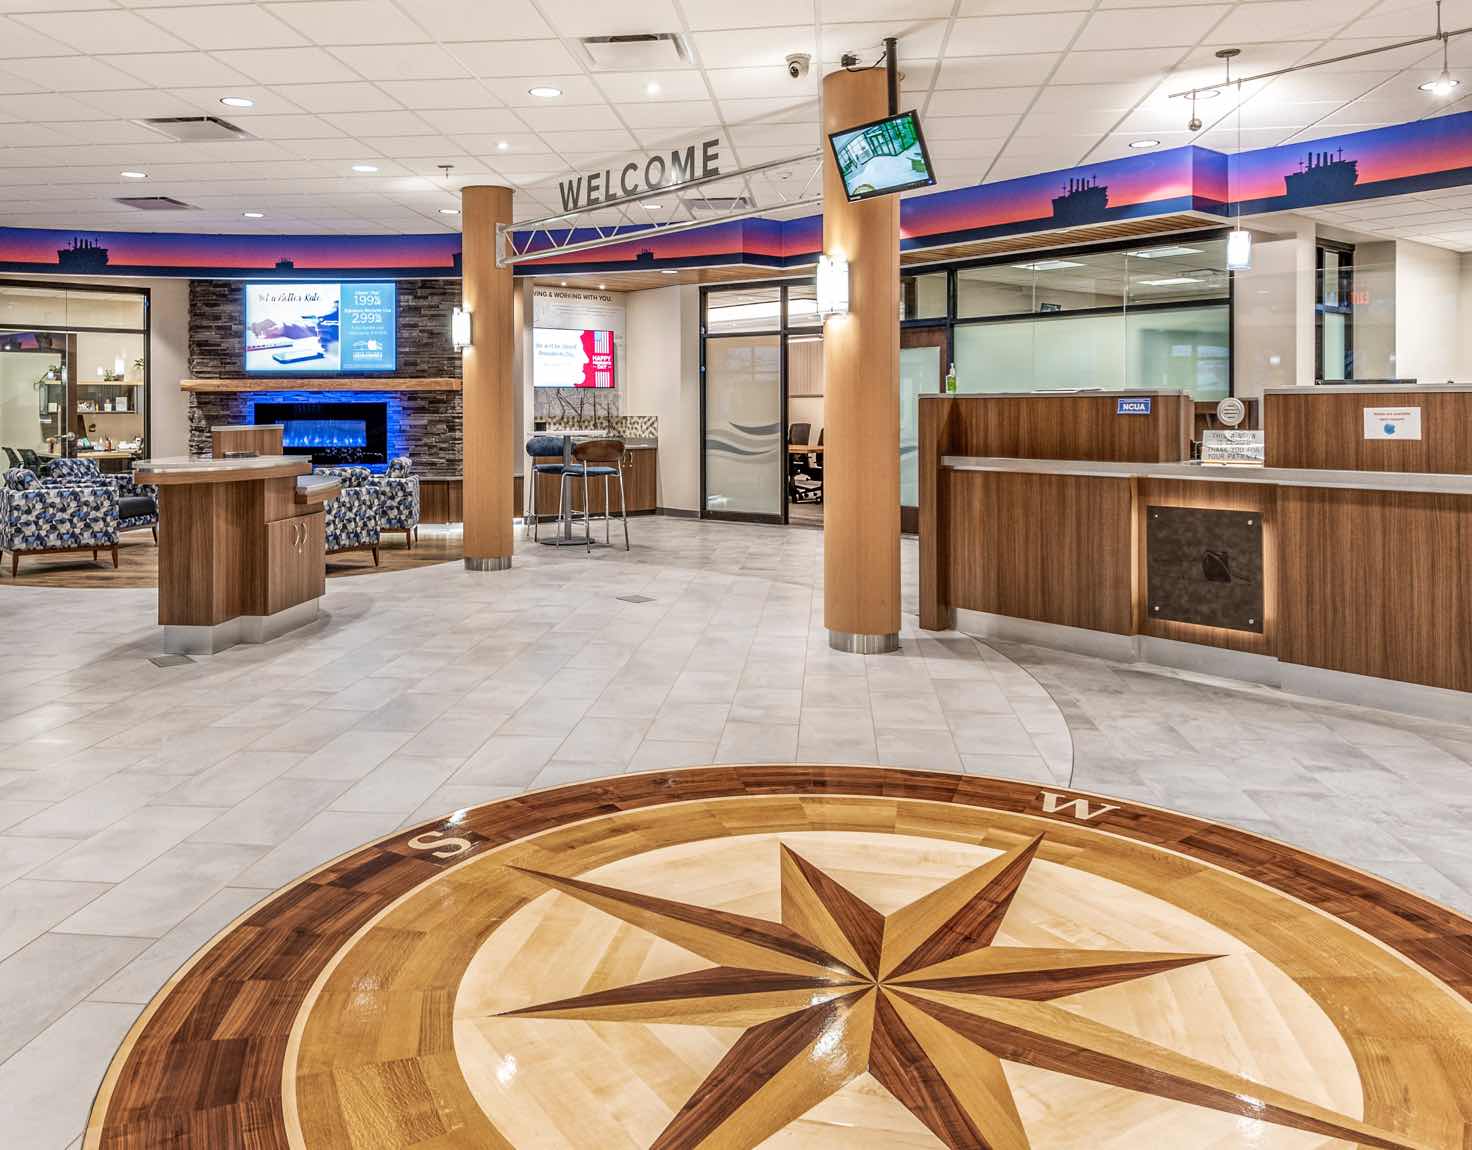 A grand bank lobby with a large wooden compass detail on the floor.